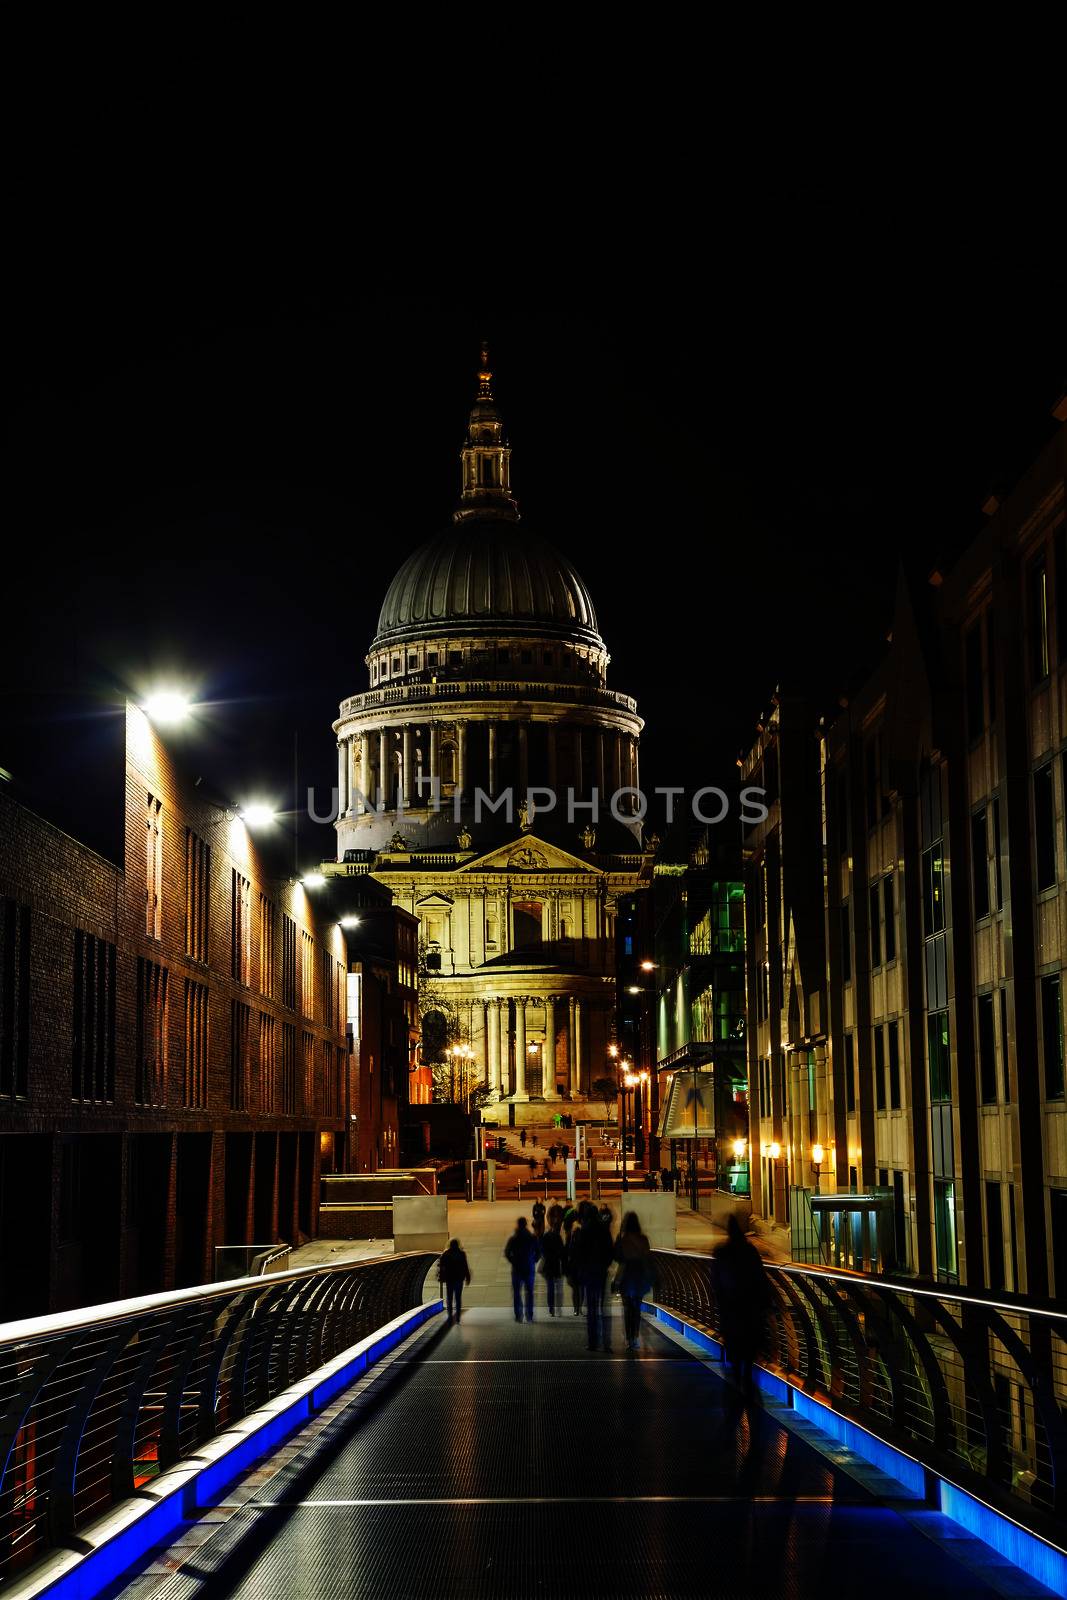 Saint Paul's cathedral in London by AndreyKr